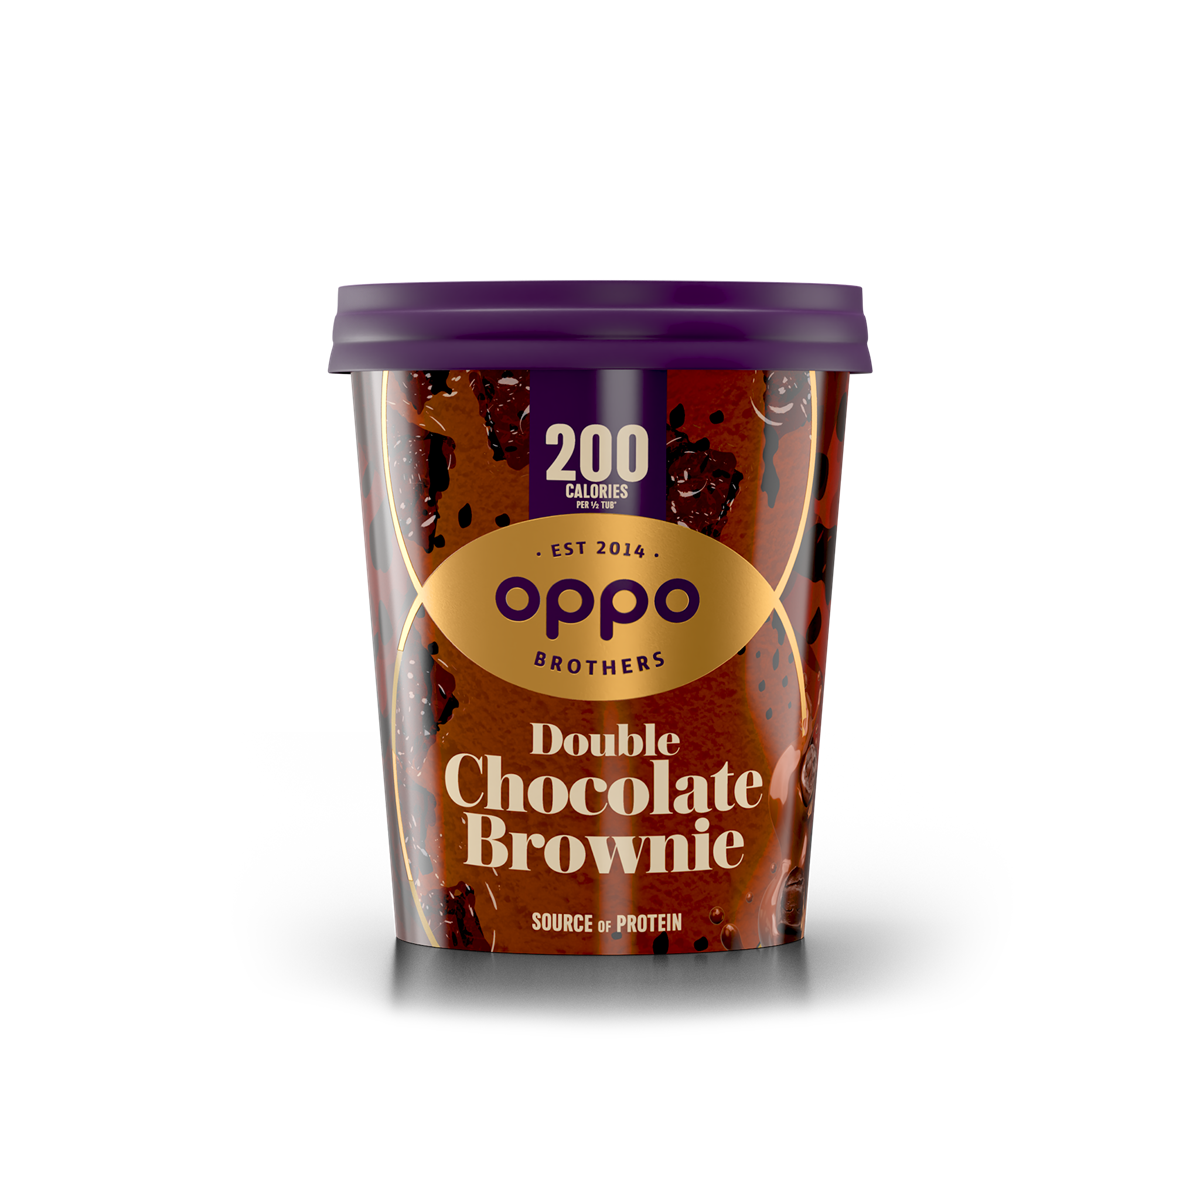 Oppo_Double Chocolate Brownie_UVP_5,99__